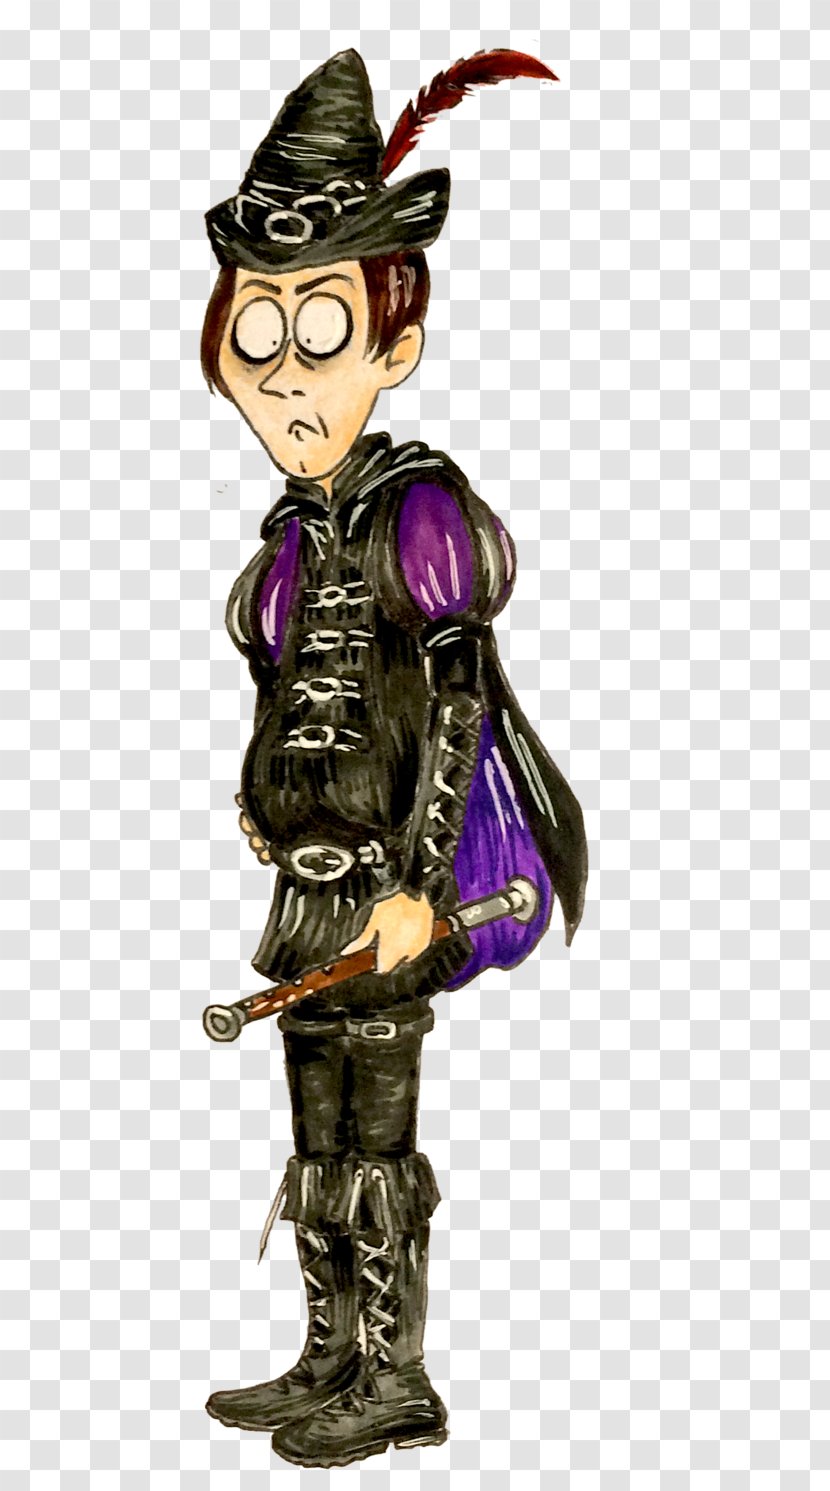 Figurine Character Animated Cartoon - Art - Pied Piper Transparent PNG